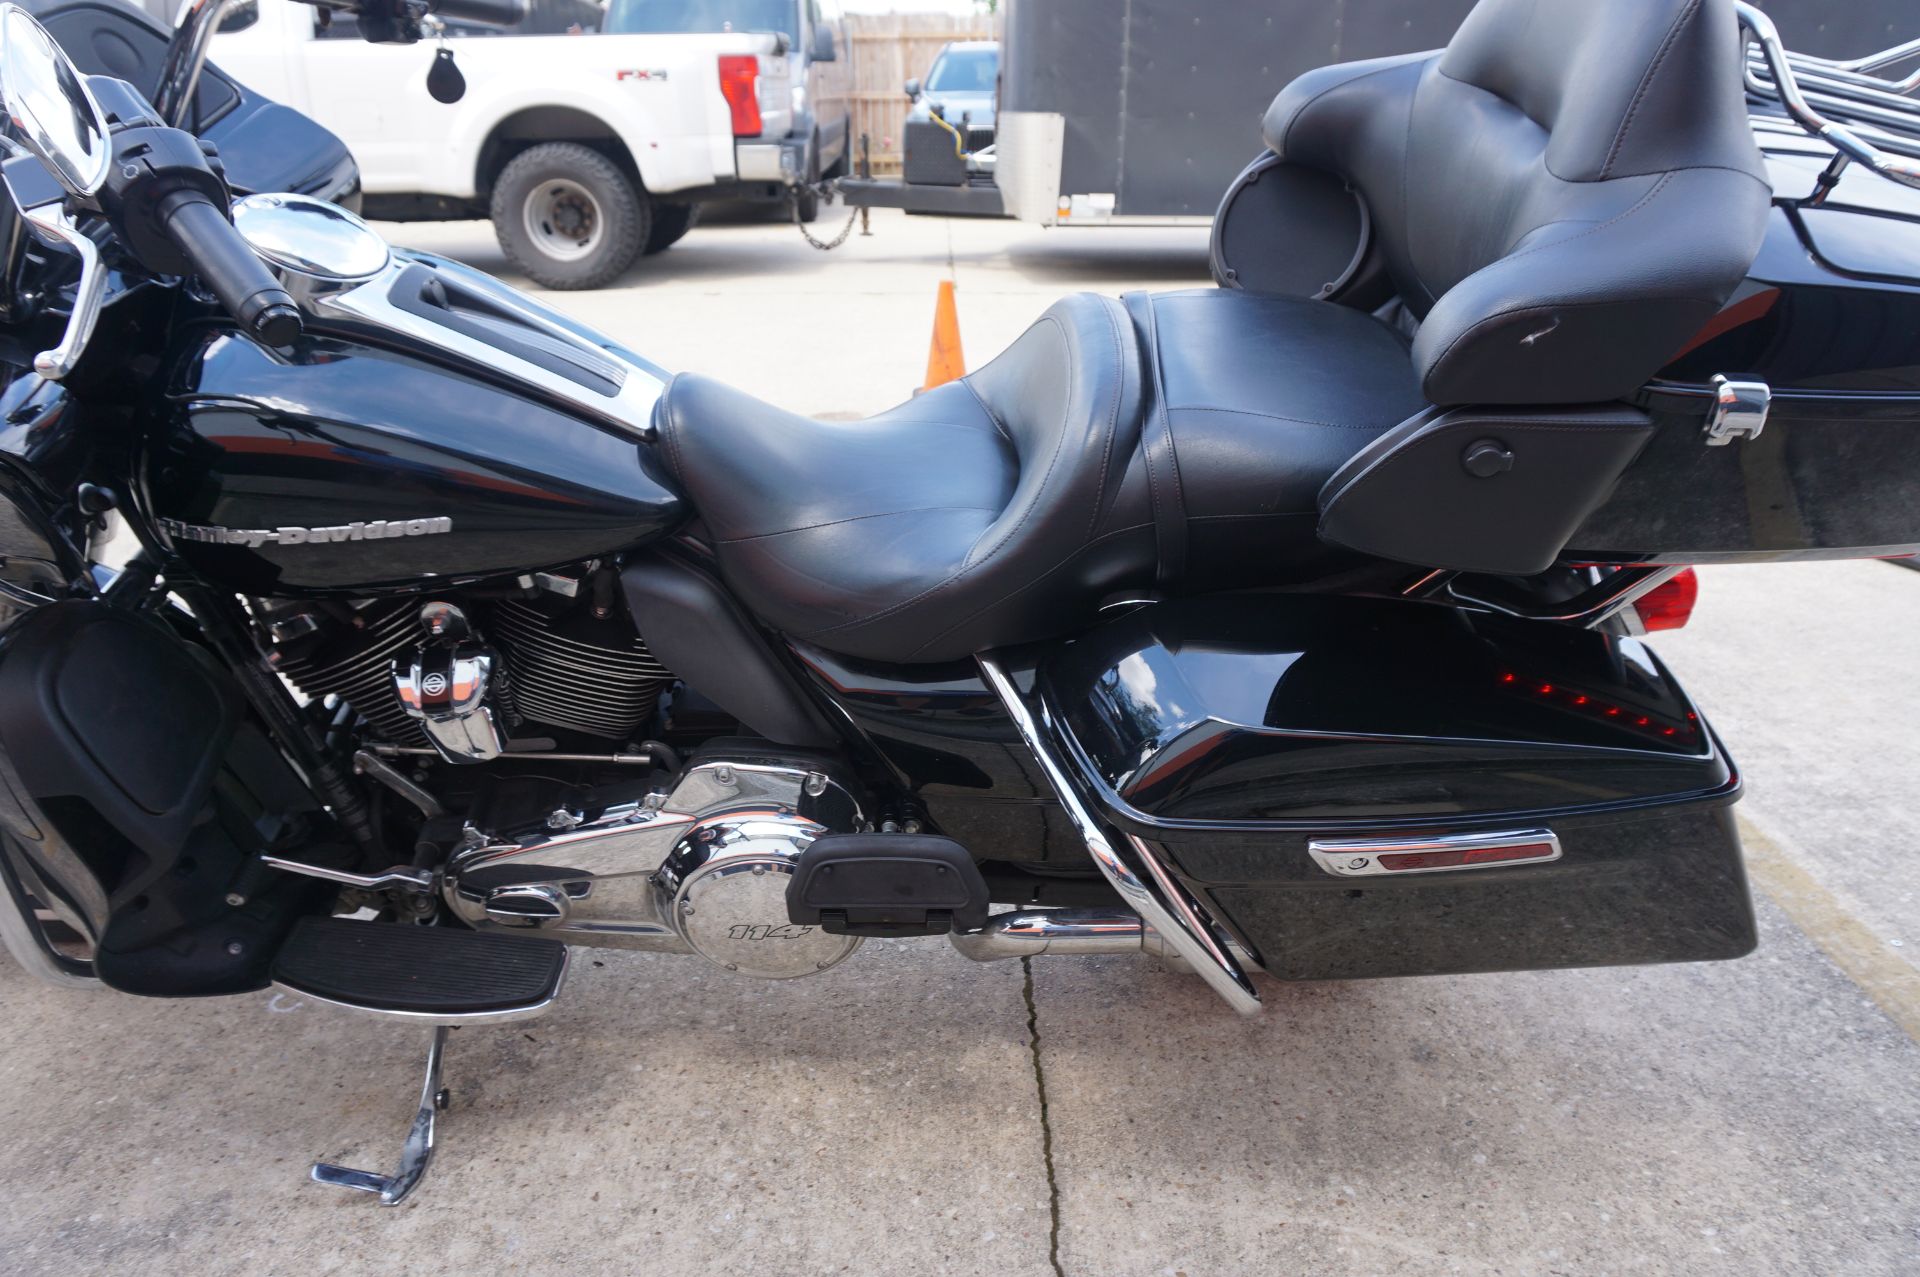 2021 Harley-Davidson Road Glide® Limited in Metairie, Louisiana - Photo 10